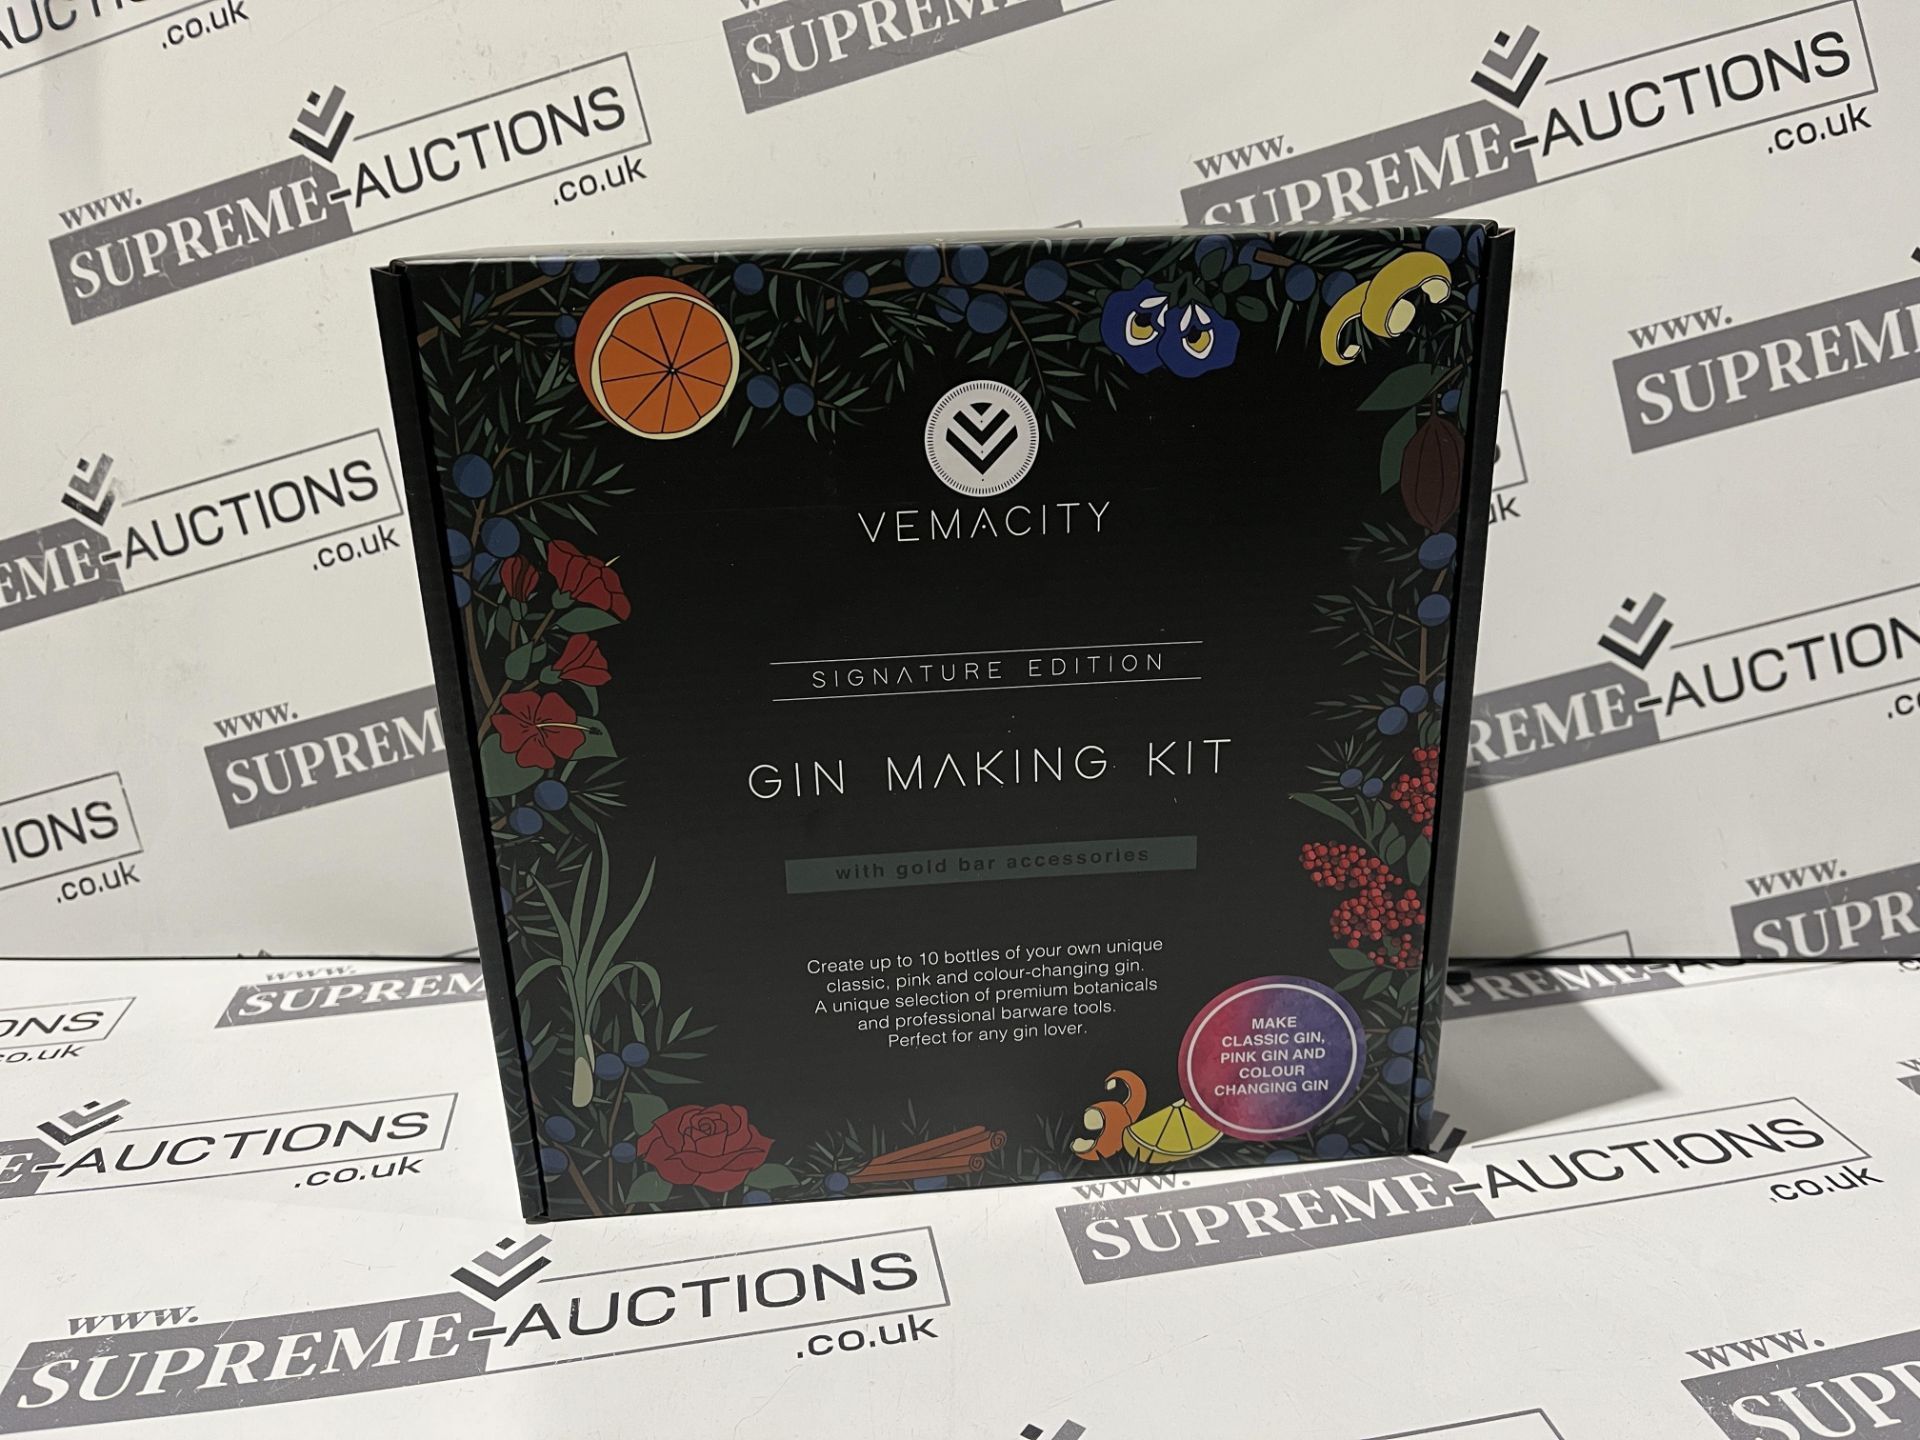 8 X BRAND NEW VEMACITY SIGNATURE GIN MAKING KITS WITH GOLD BAR ACCESSORIES RRP £42 EACH R10-9